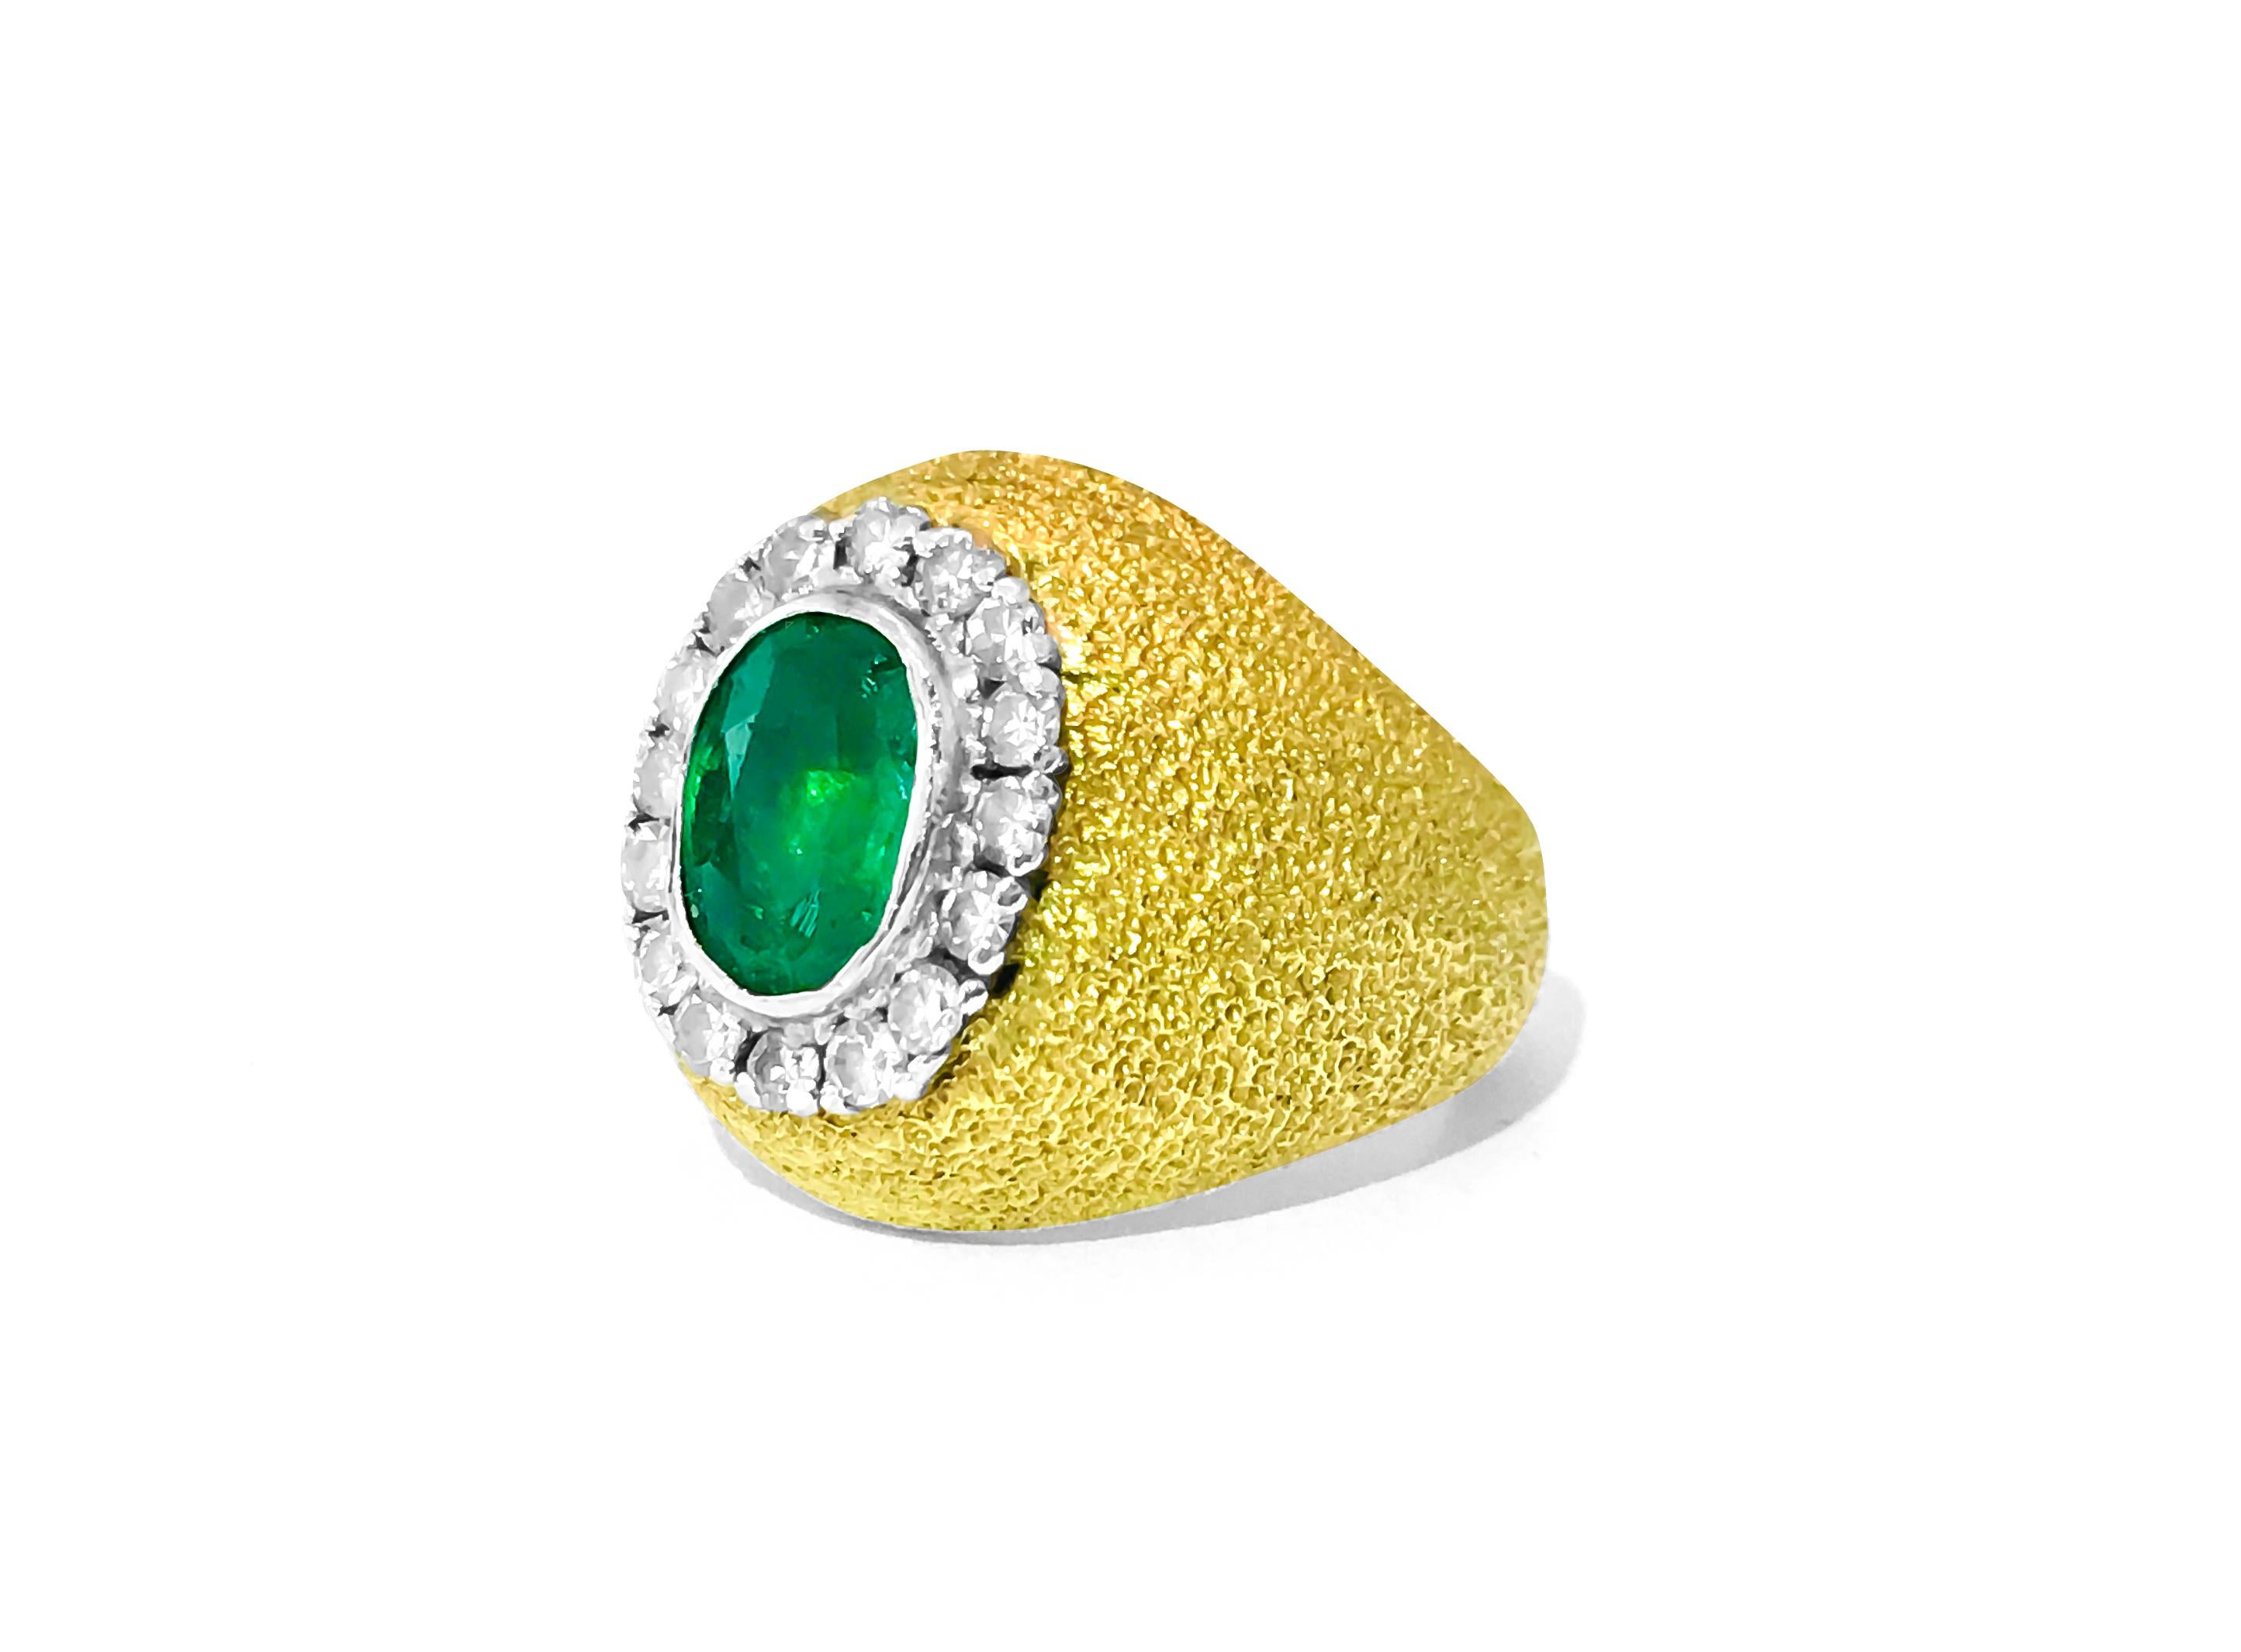 Metal: 18k Yellow Gold 

Center: 2.50 carat Colombian emerald. Oval cut. Intense color and saturation. 100% natural earth mined. Set in gypsy setting. 

Diamonds:  F color and VS clarity. Round brilliant cut set in prongs. 

Vintage mogul style